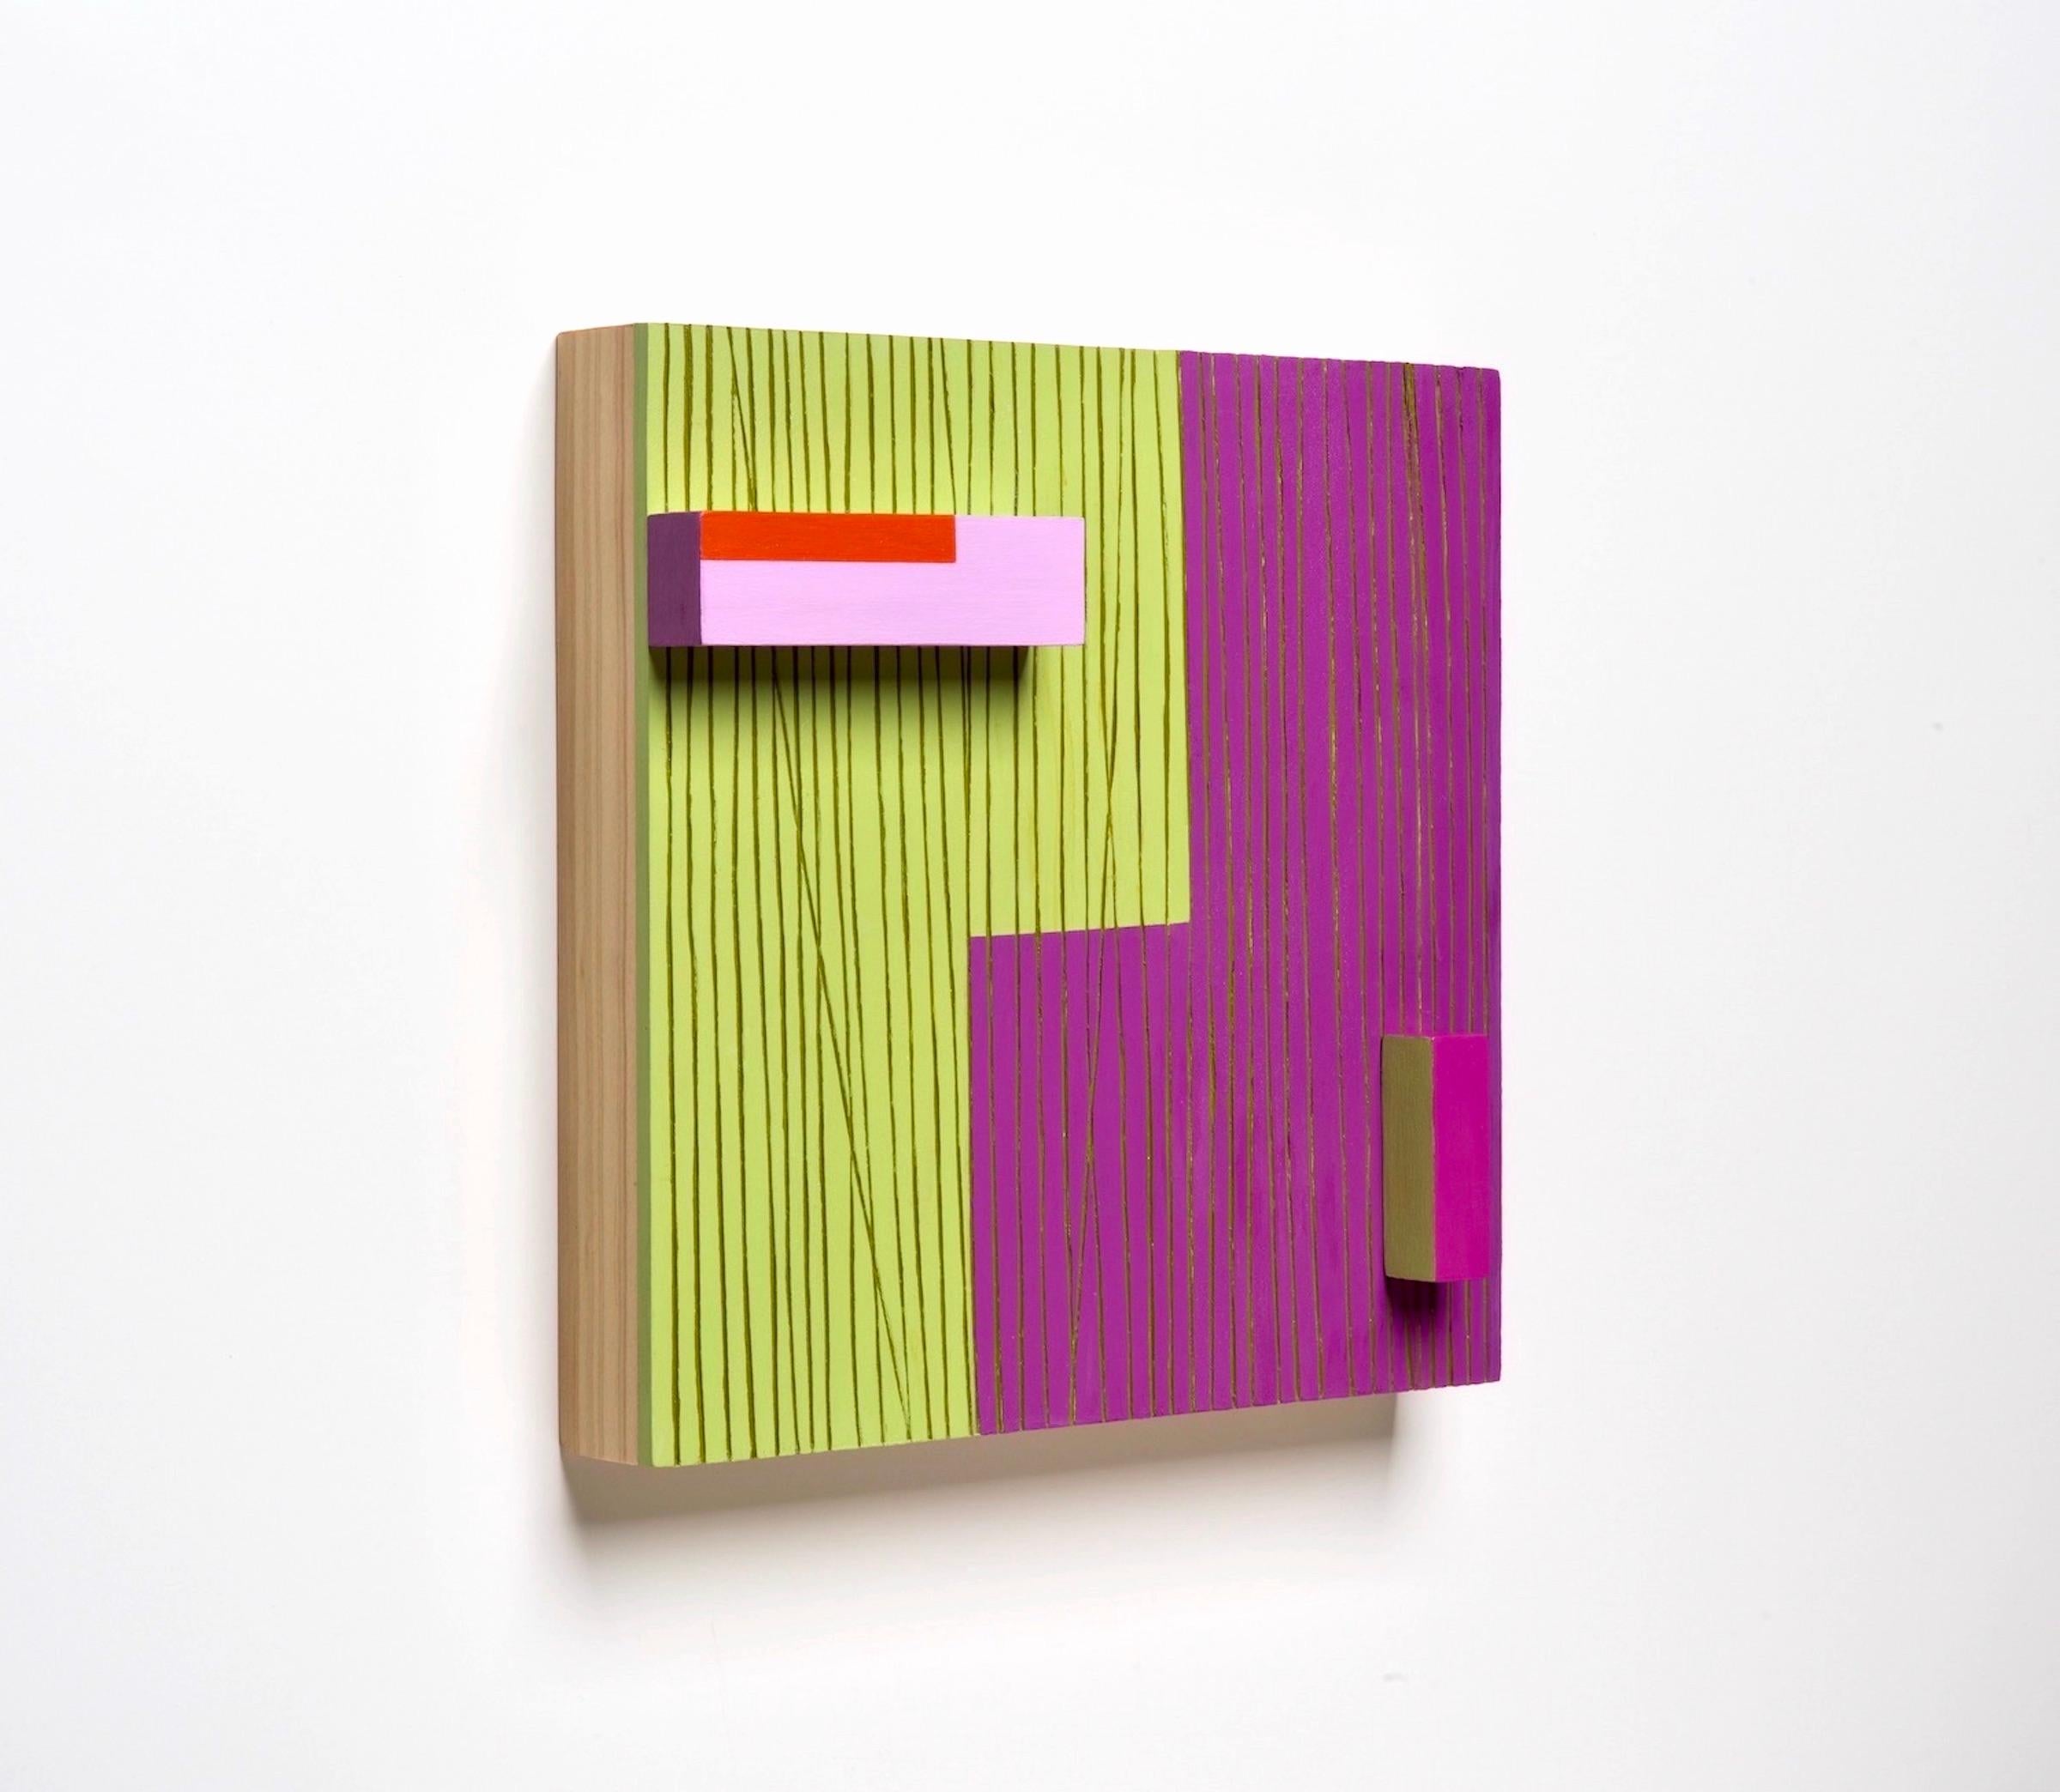 A Path Exists- Abstract Wall Sculpture - green, purple, minimalism, wood, mcm - Painting by Terri Fridkin